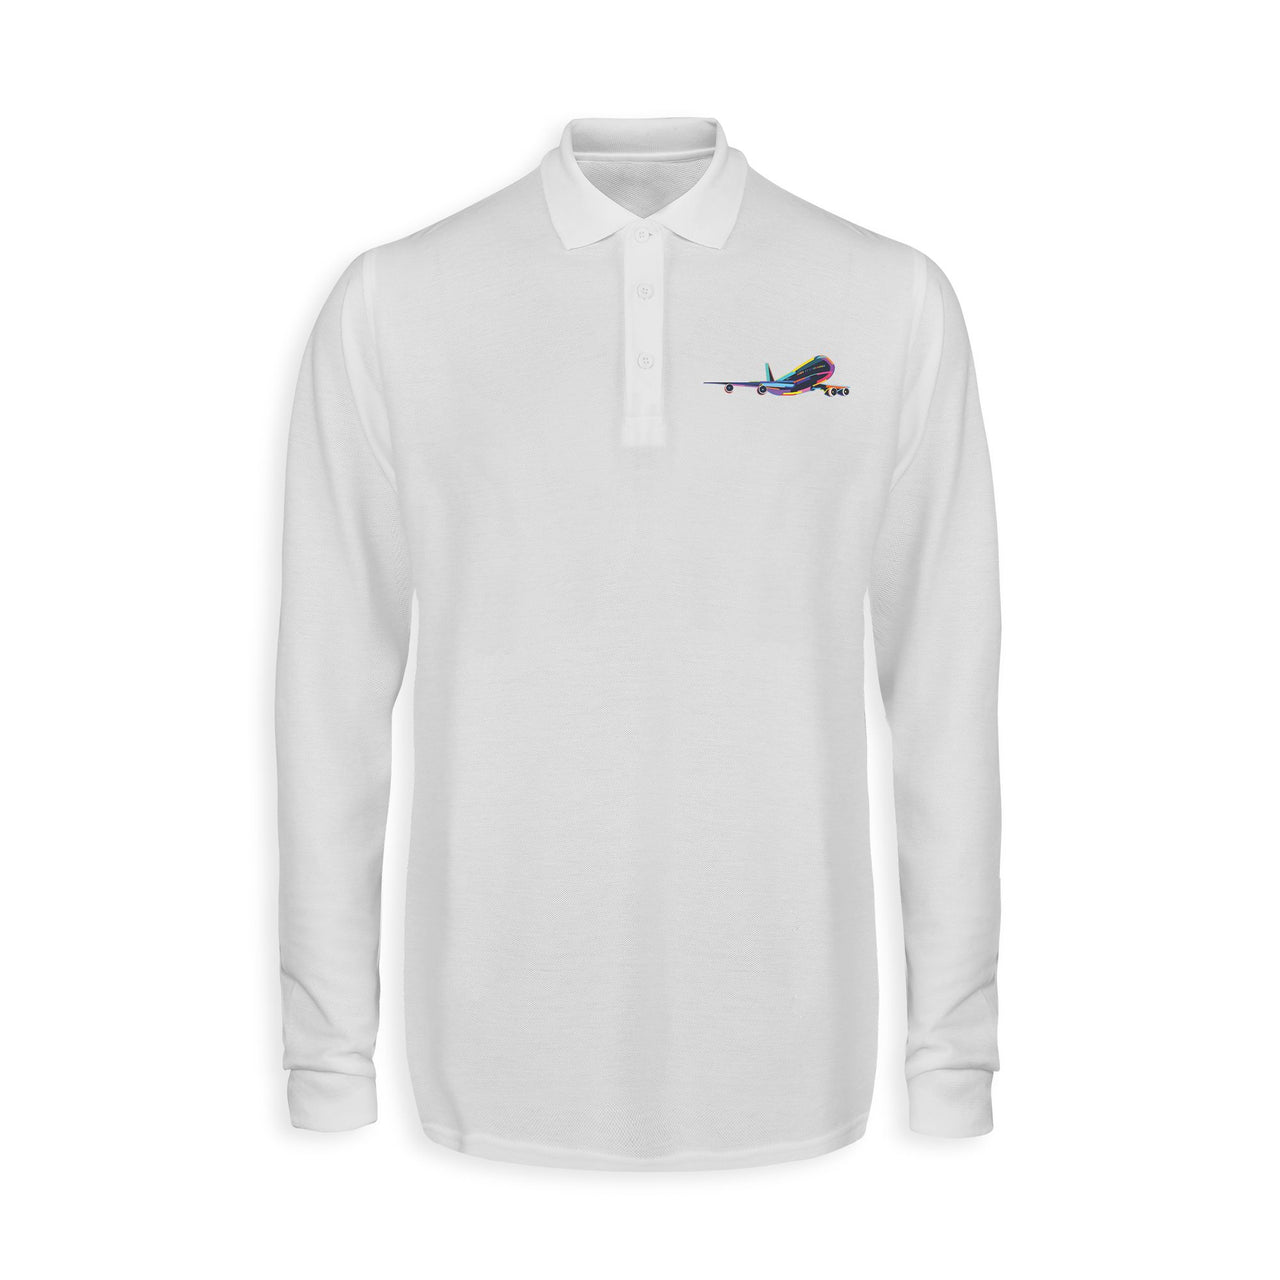 Multicolor Airplane Designed Long Sleeve Polo T-Shirts